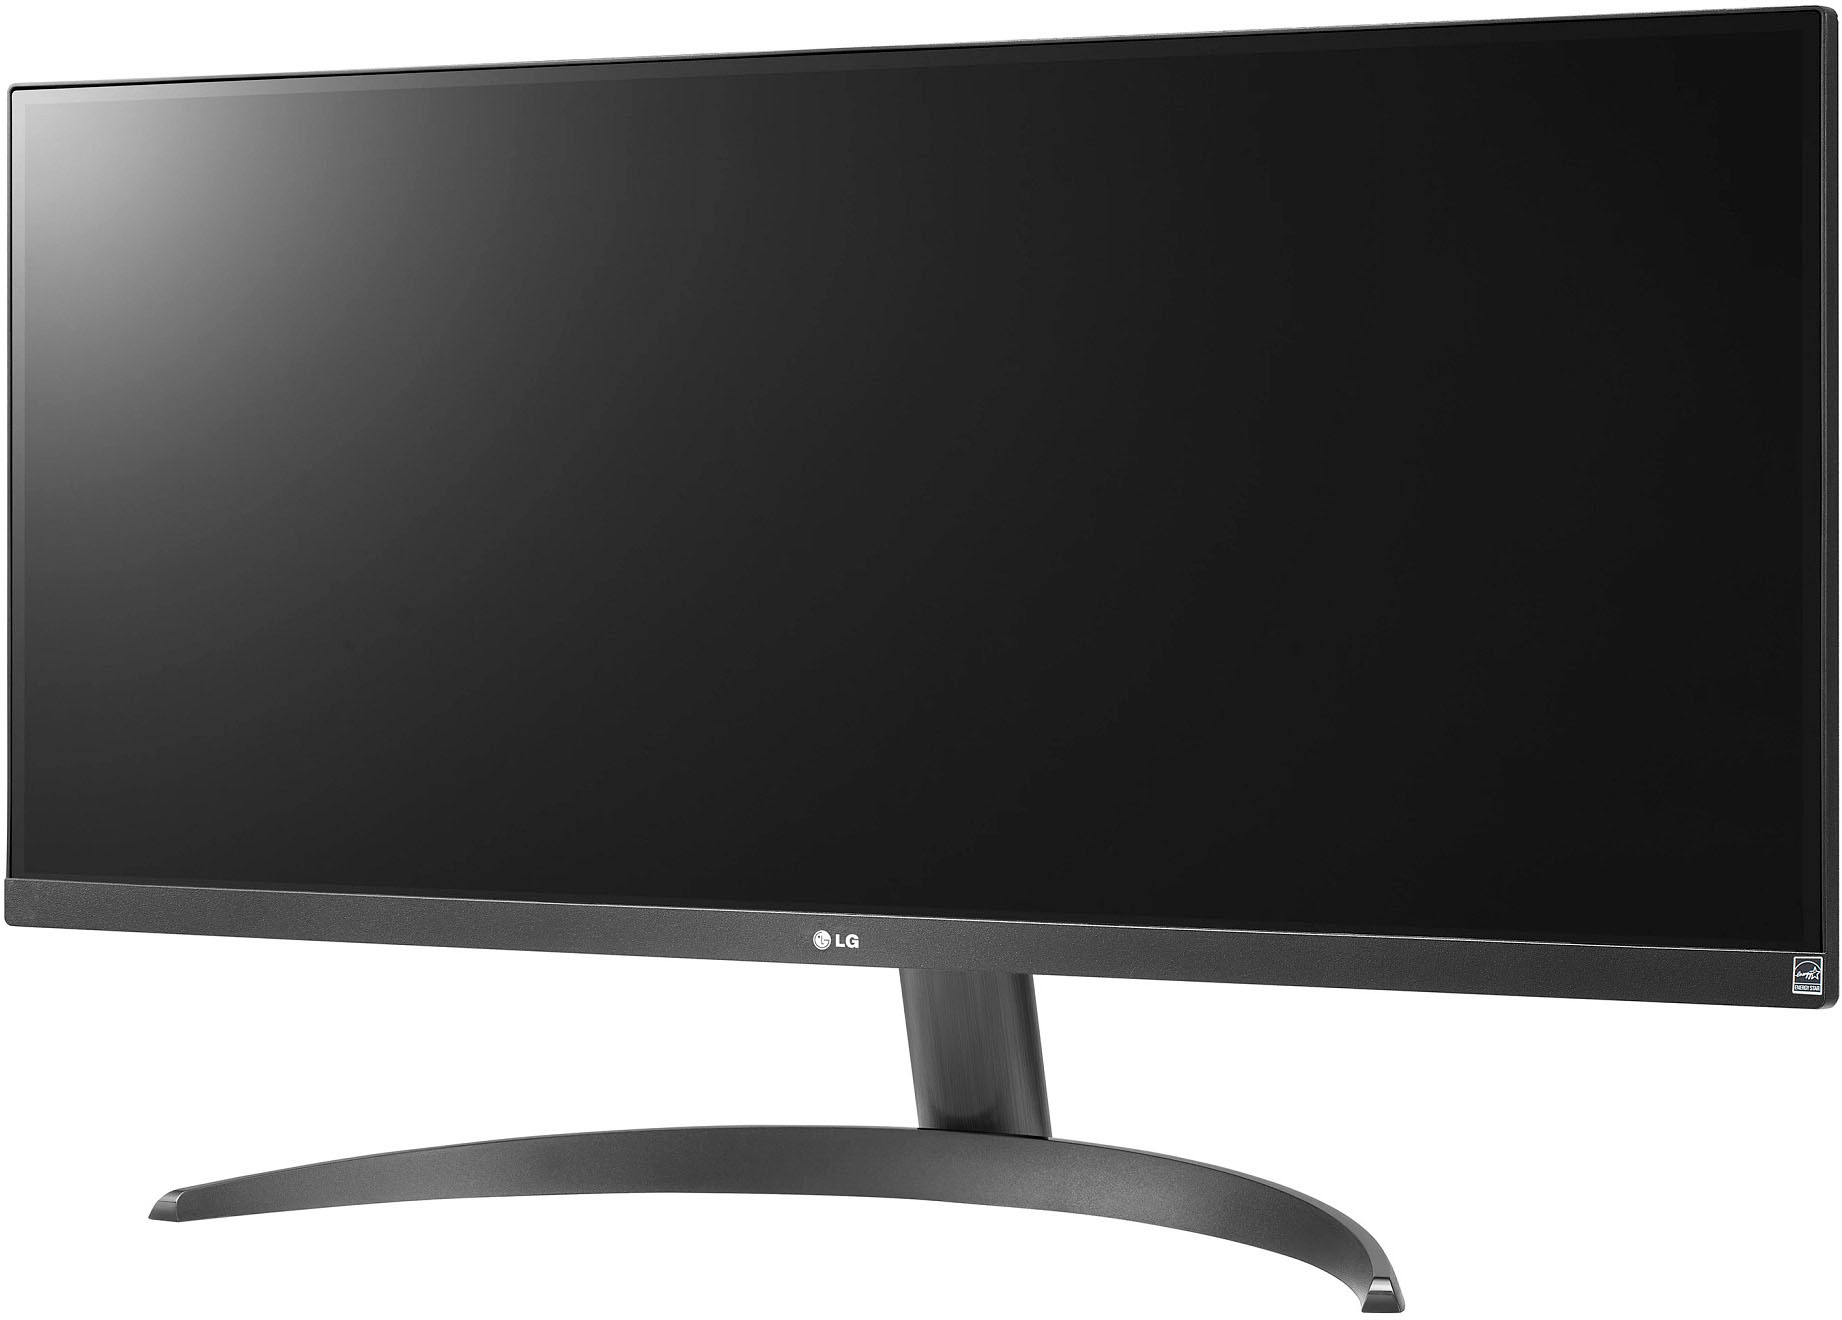 Back View: LG - DualUp 28" IPS LED SDQHD Monitor with HDR (HDMI, DisplayPort, USB)